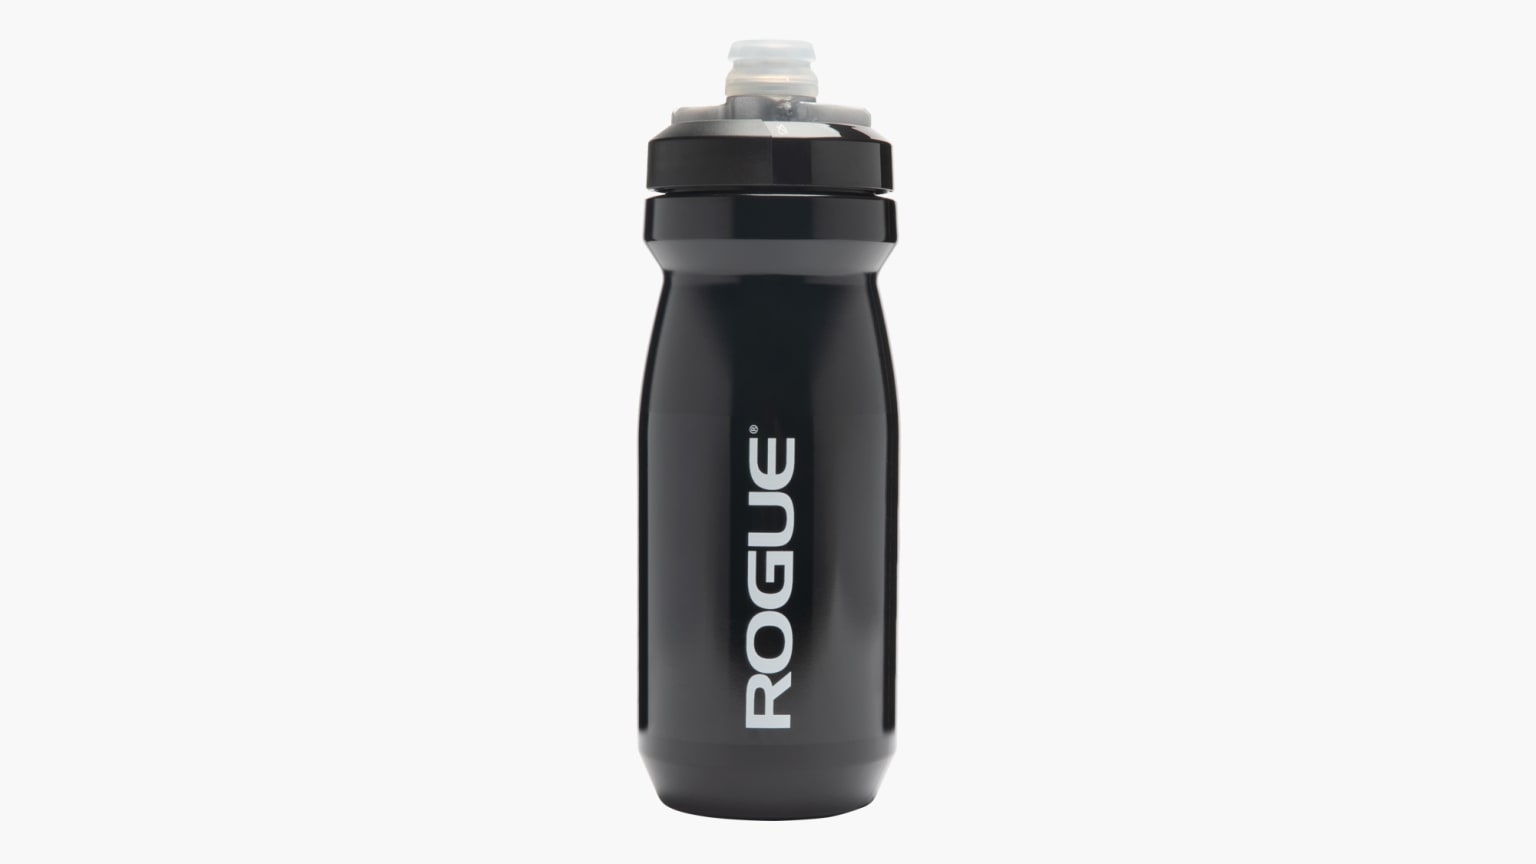 https://assets.roguefitness.com/f_auto,q_auto,c_limit,w_1536,b_rgb:f8f8f8/catalog/Gear%20and%20Accessories/Accessories/Shakers%20and%20Bottles/CB0012/CB0012-H_e0fulq.png